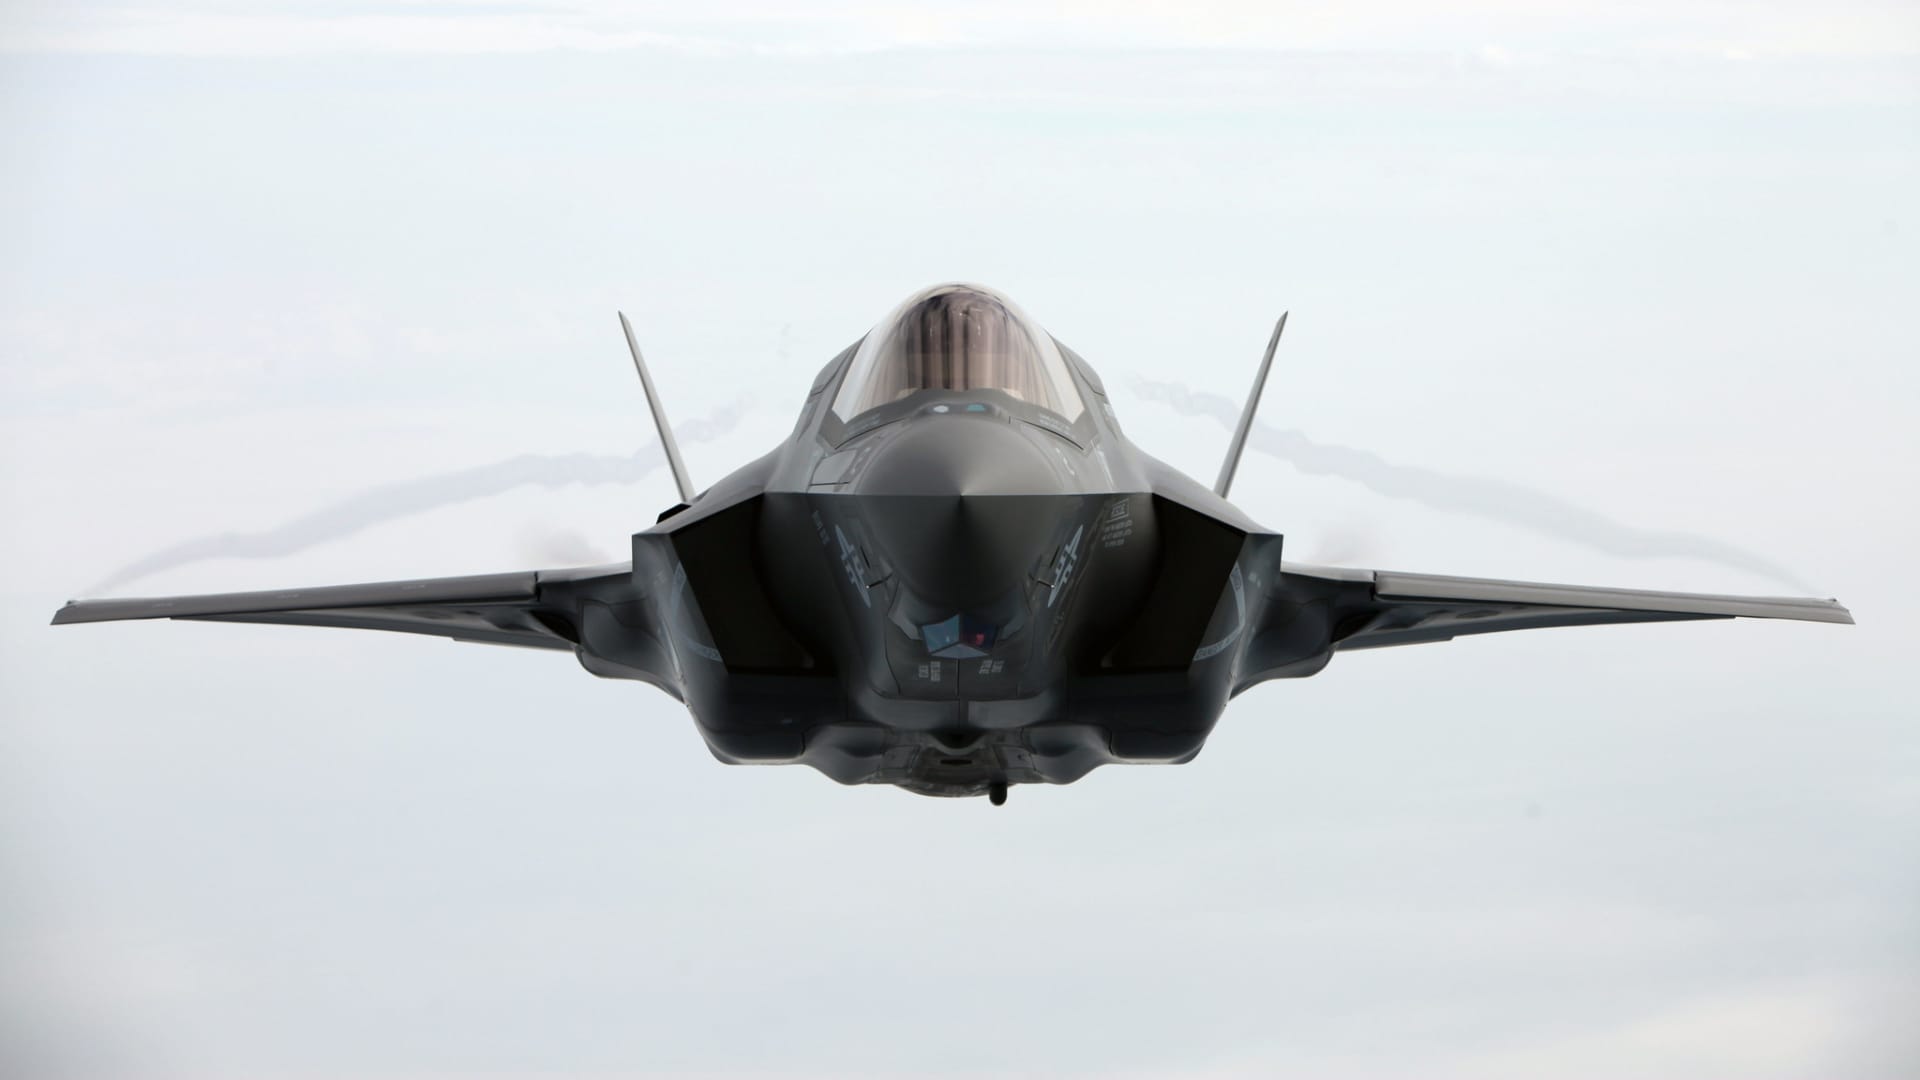 A naval aviator with Marine Fighter Attack Training Squadron 501 flies an F-35 above North Carolina during aerial refueling training on April 14, 2015.